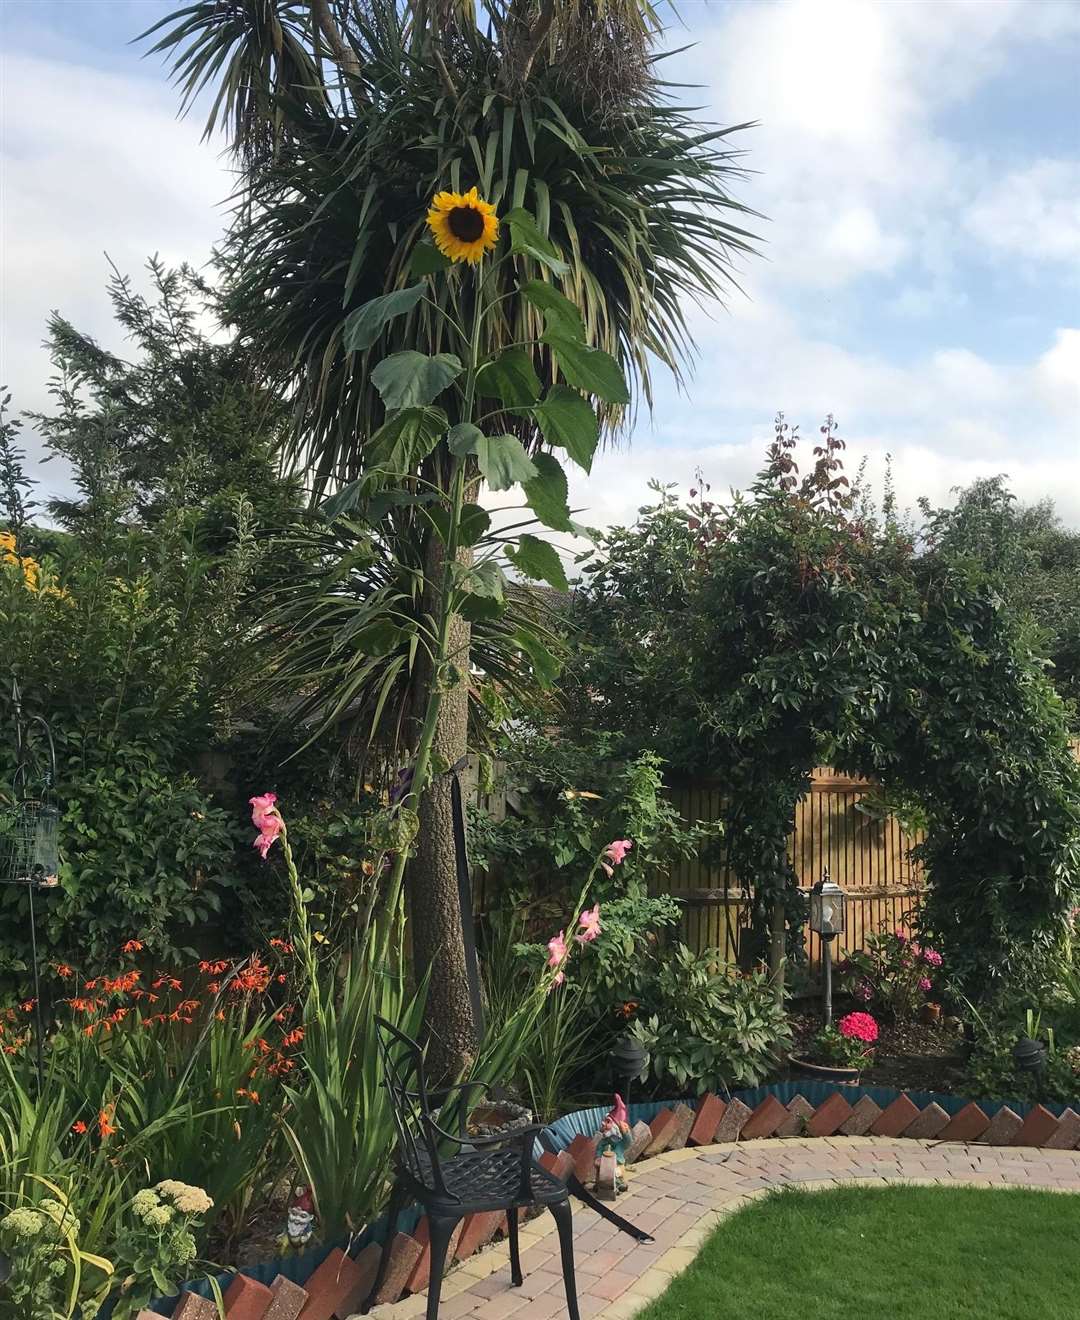 The sunflower is nearly as tall as the palm tree behind it. PIcture: Daniele Ligneau-Wilton